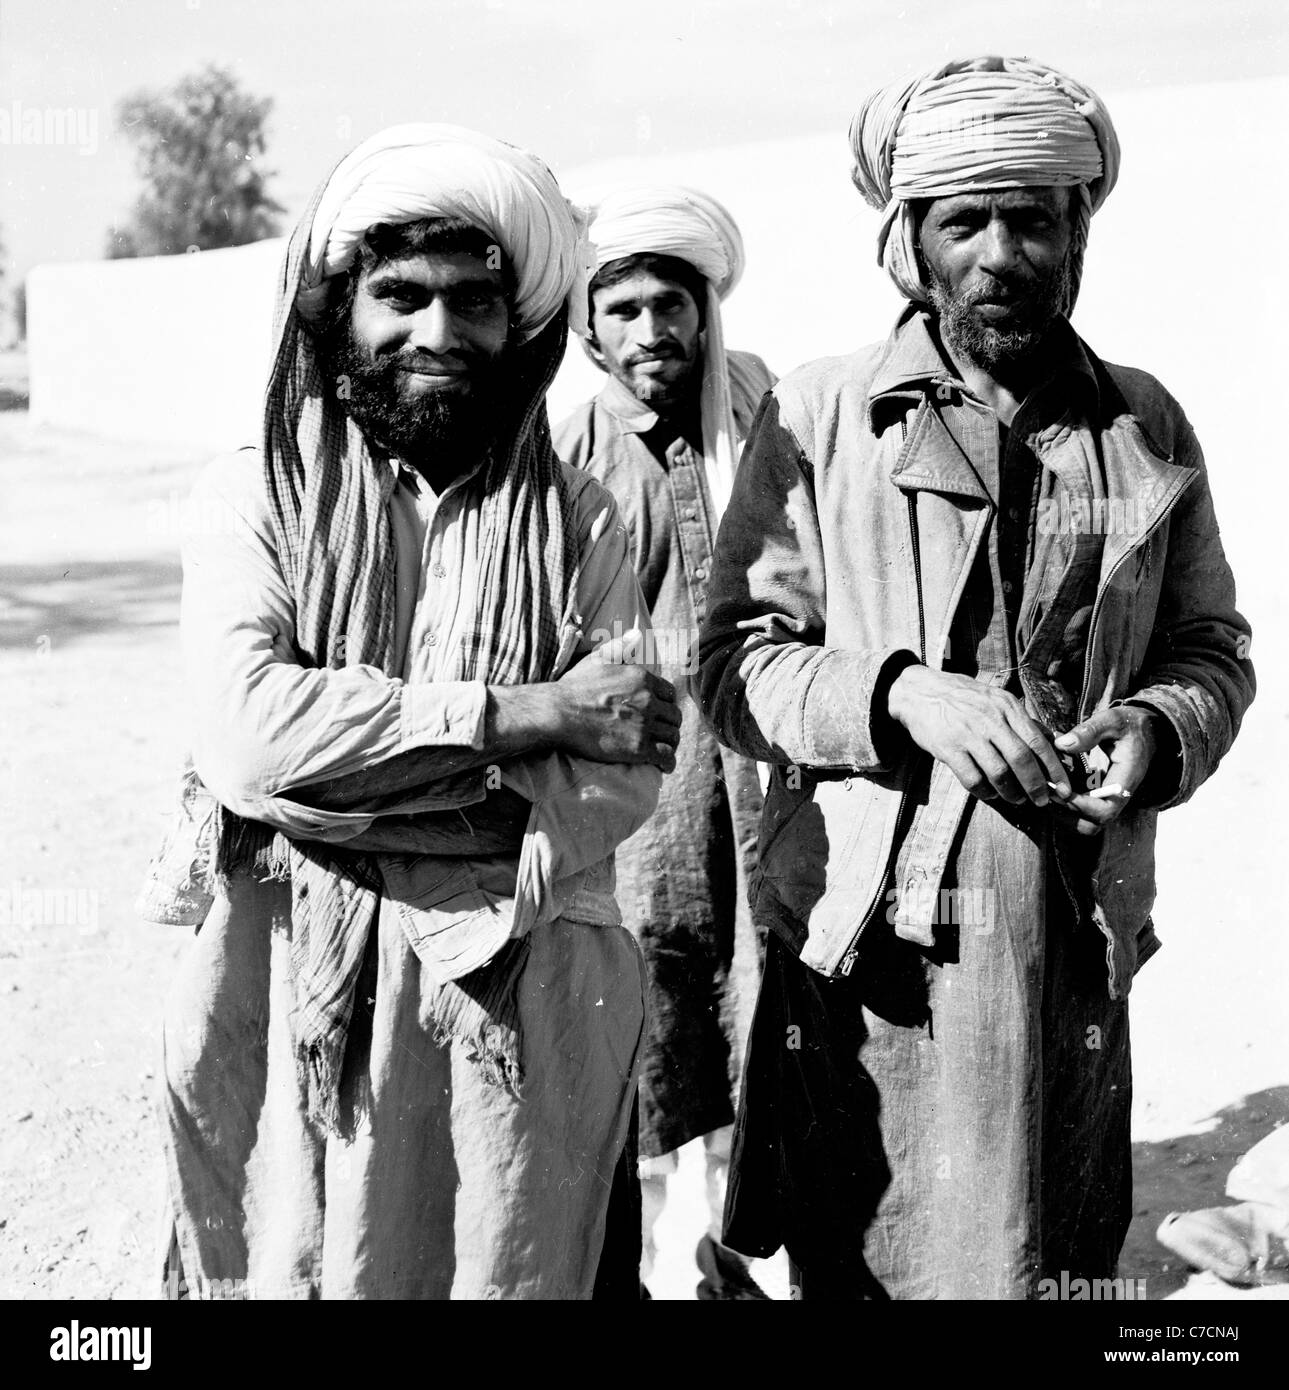 Three tribesmen or pashtuns wearing turbans and robes stand for picture, Dhadar Pakistan. Taken in the 1950s by J. Allan Cash. Stock Photo